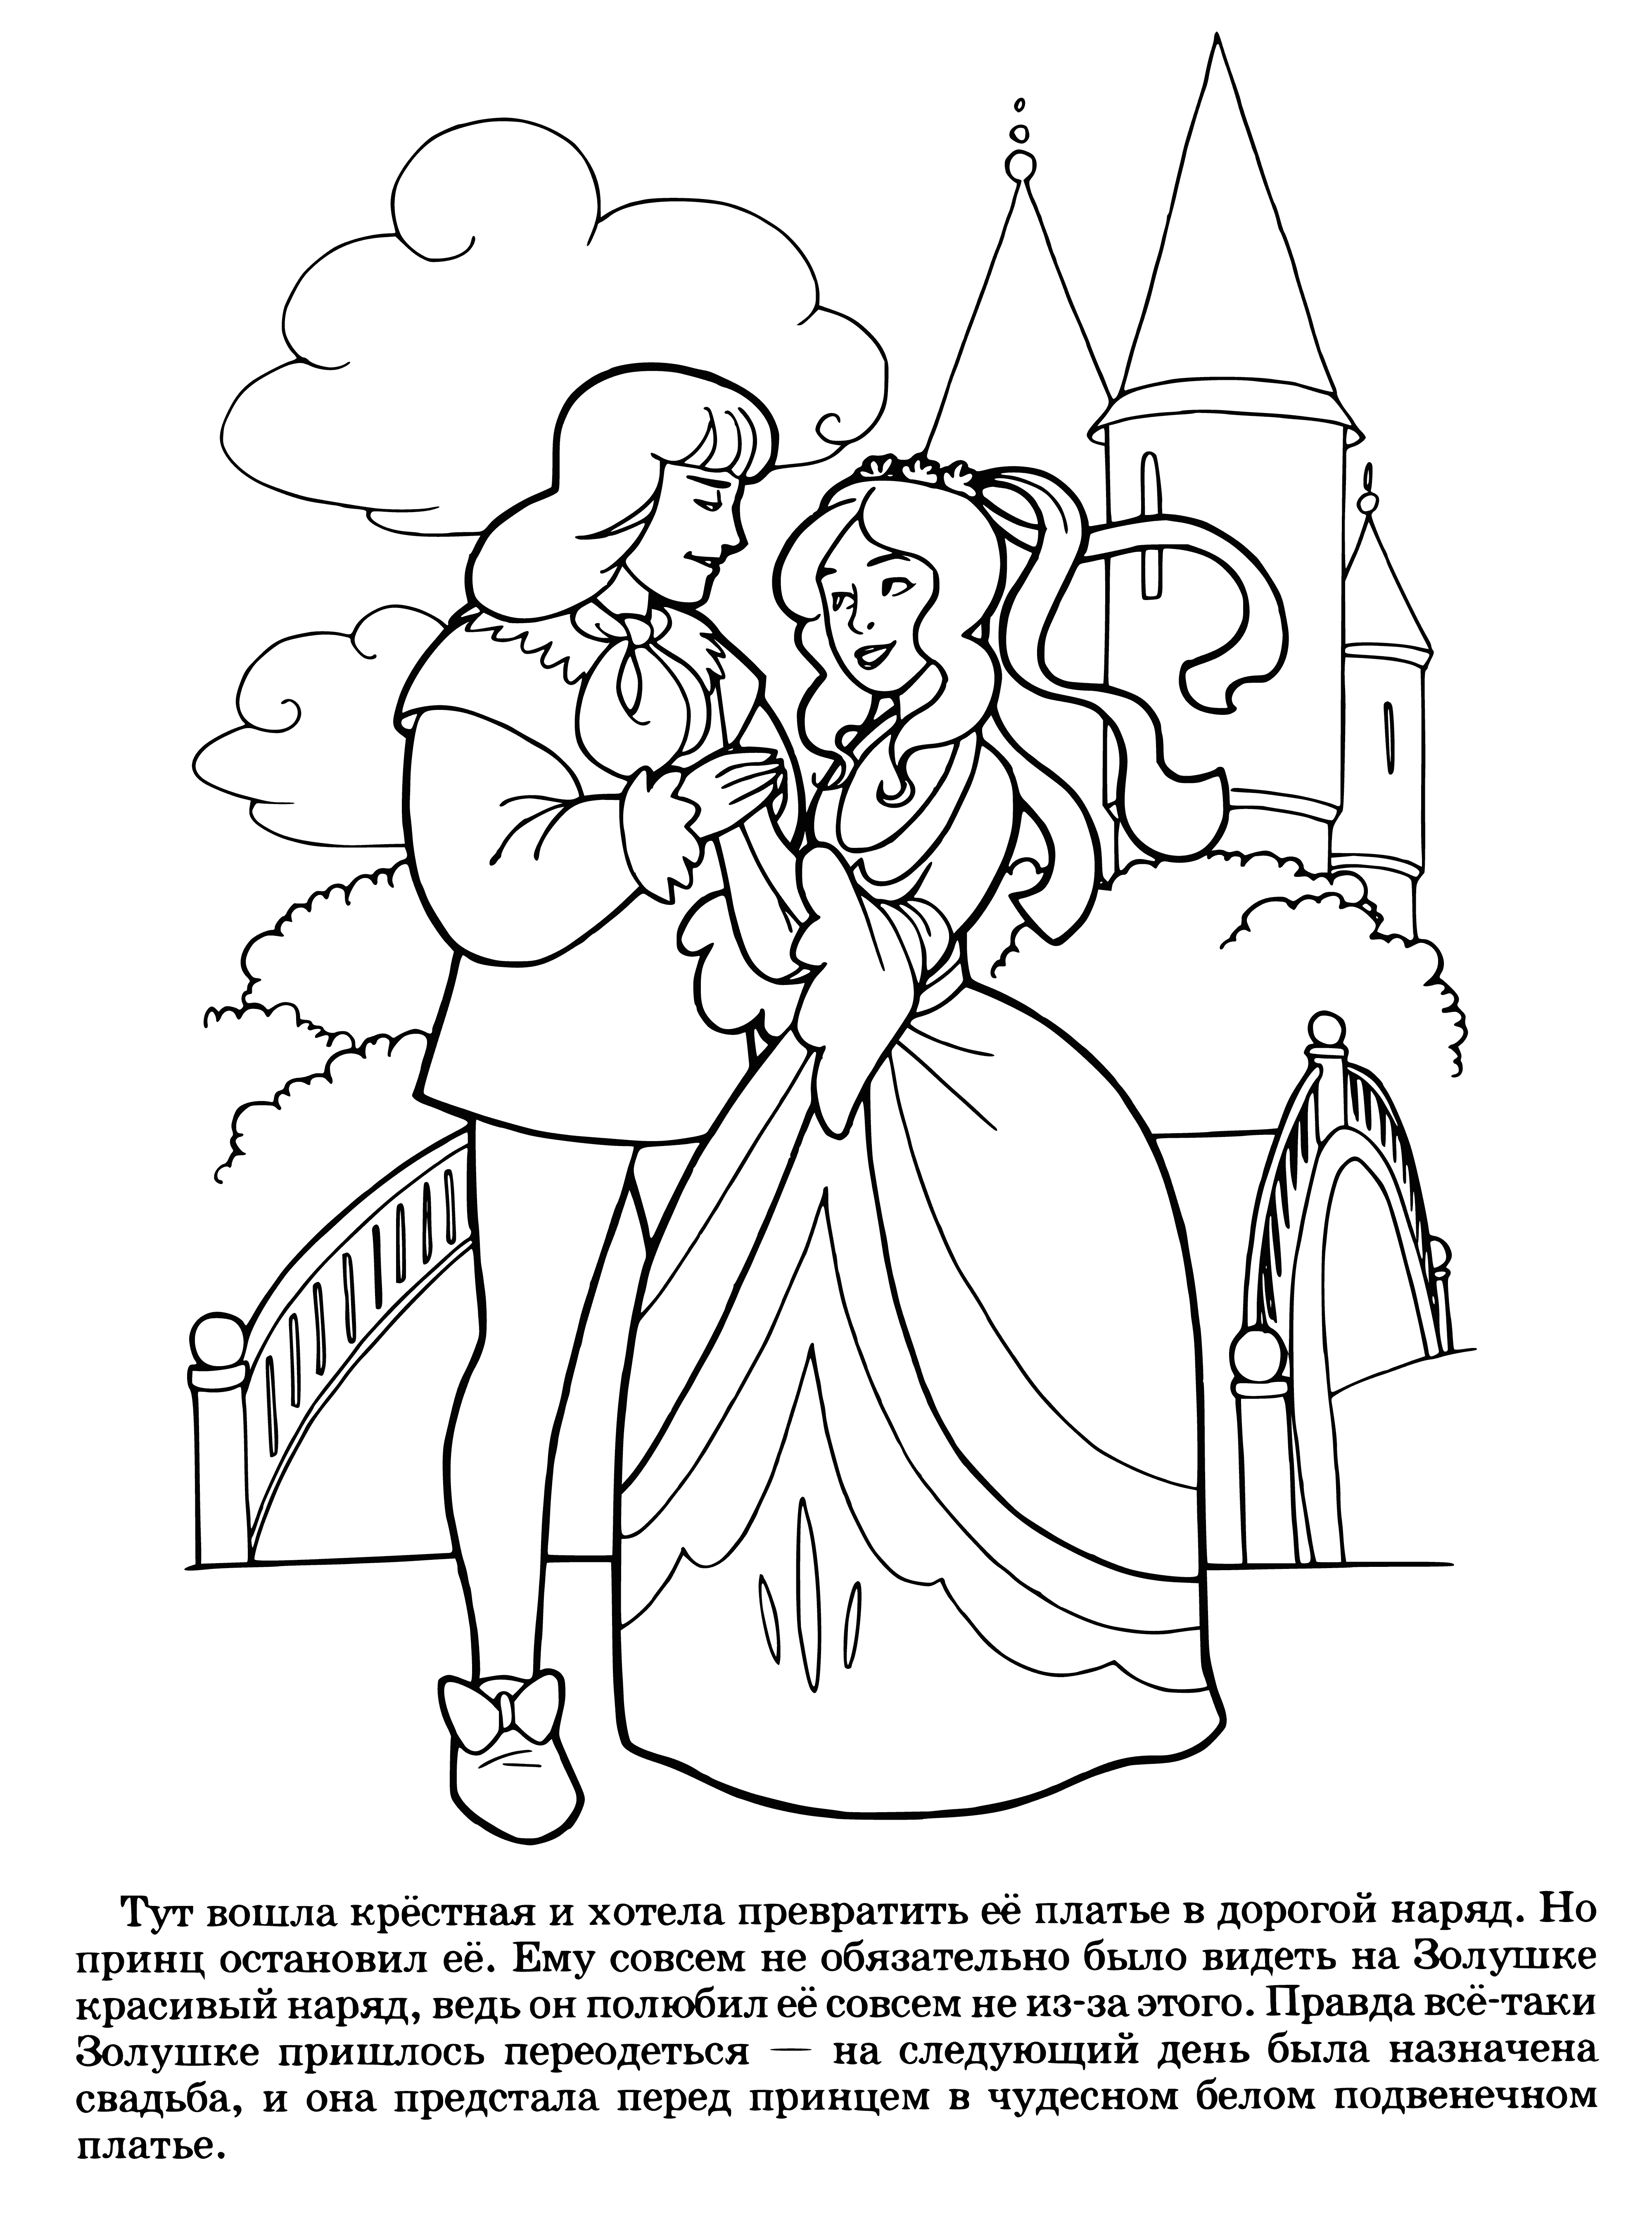 coloring page: Cinderella in beautiful wedding dress, surrounded by unhappy step-sisters, holding bouquet of flowers and castle in background.